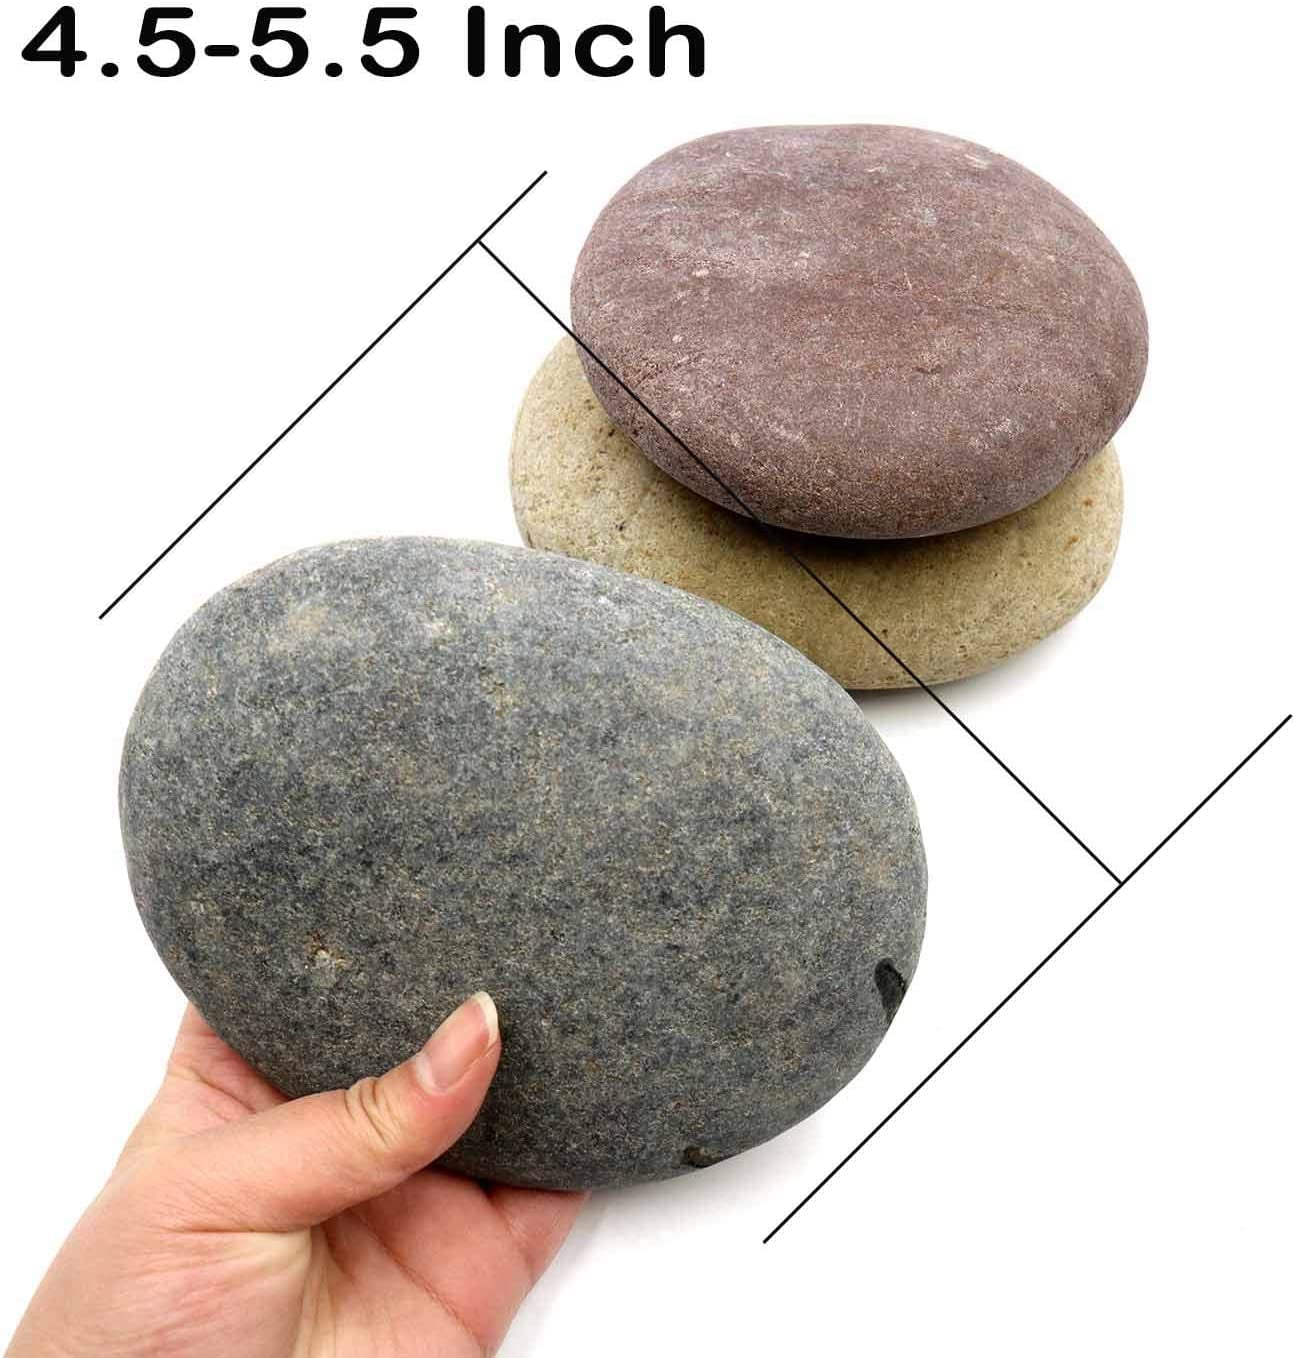 Koltose by Mash - Craft Rocks for Painting, 100% Natural XL Multi-Colored  Stones, 3.5” - 4.5” inch, Set of 12